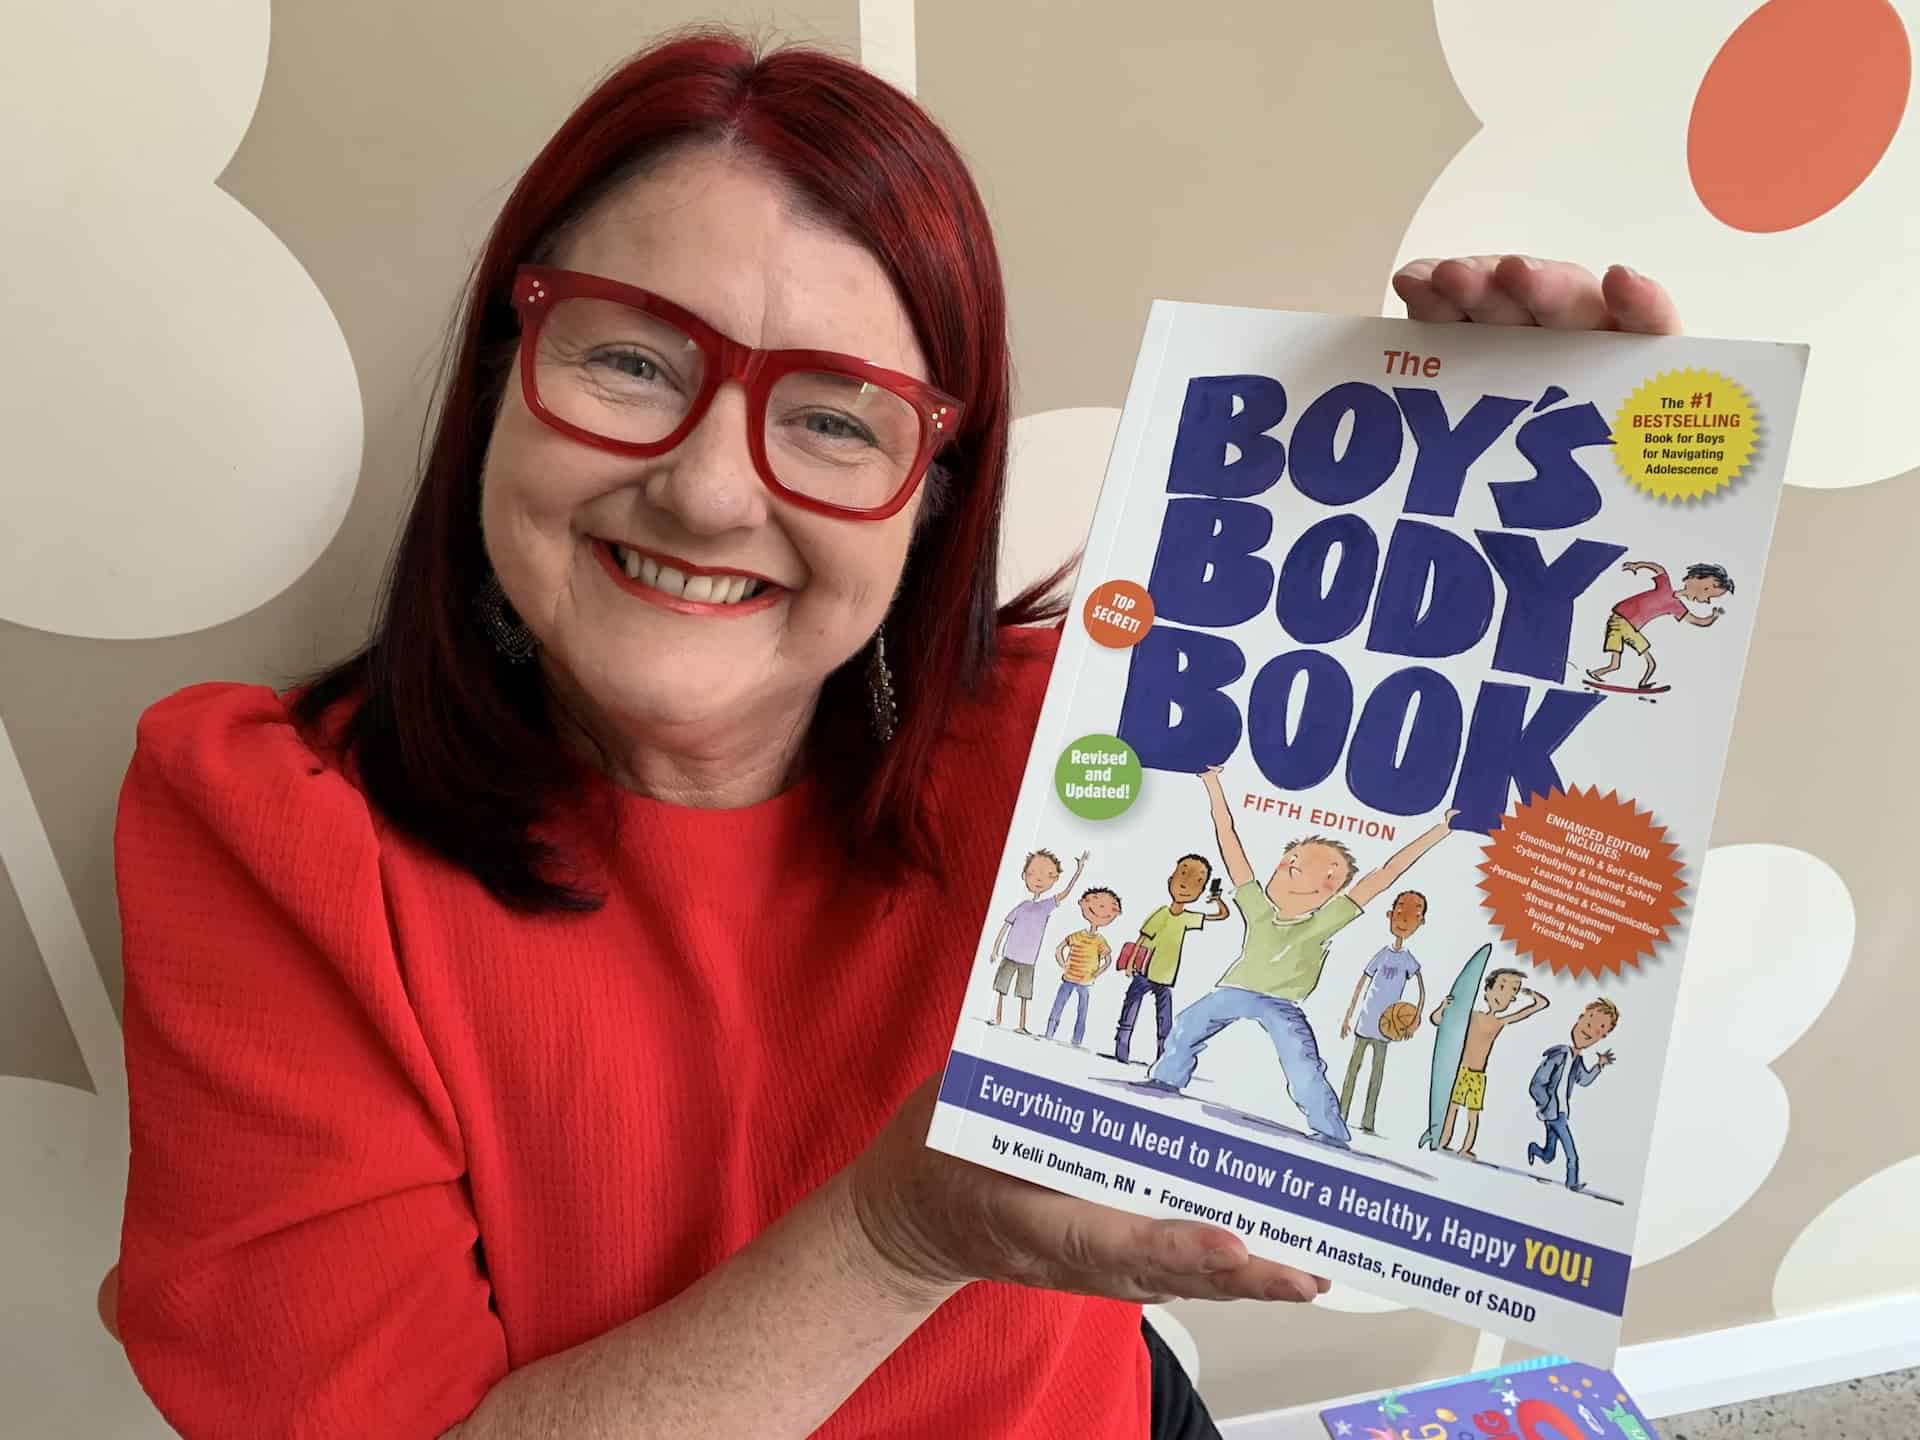 The Boy's Body Book - Book review by Rowena Thomas | 'Amazing Me'